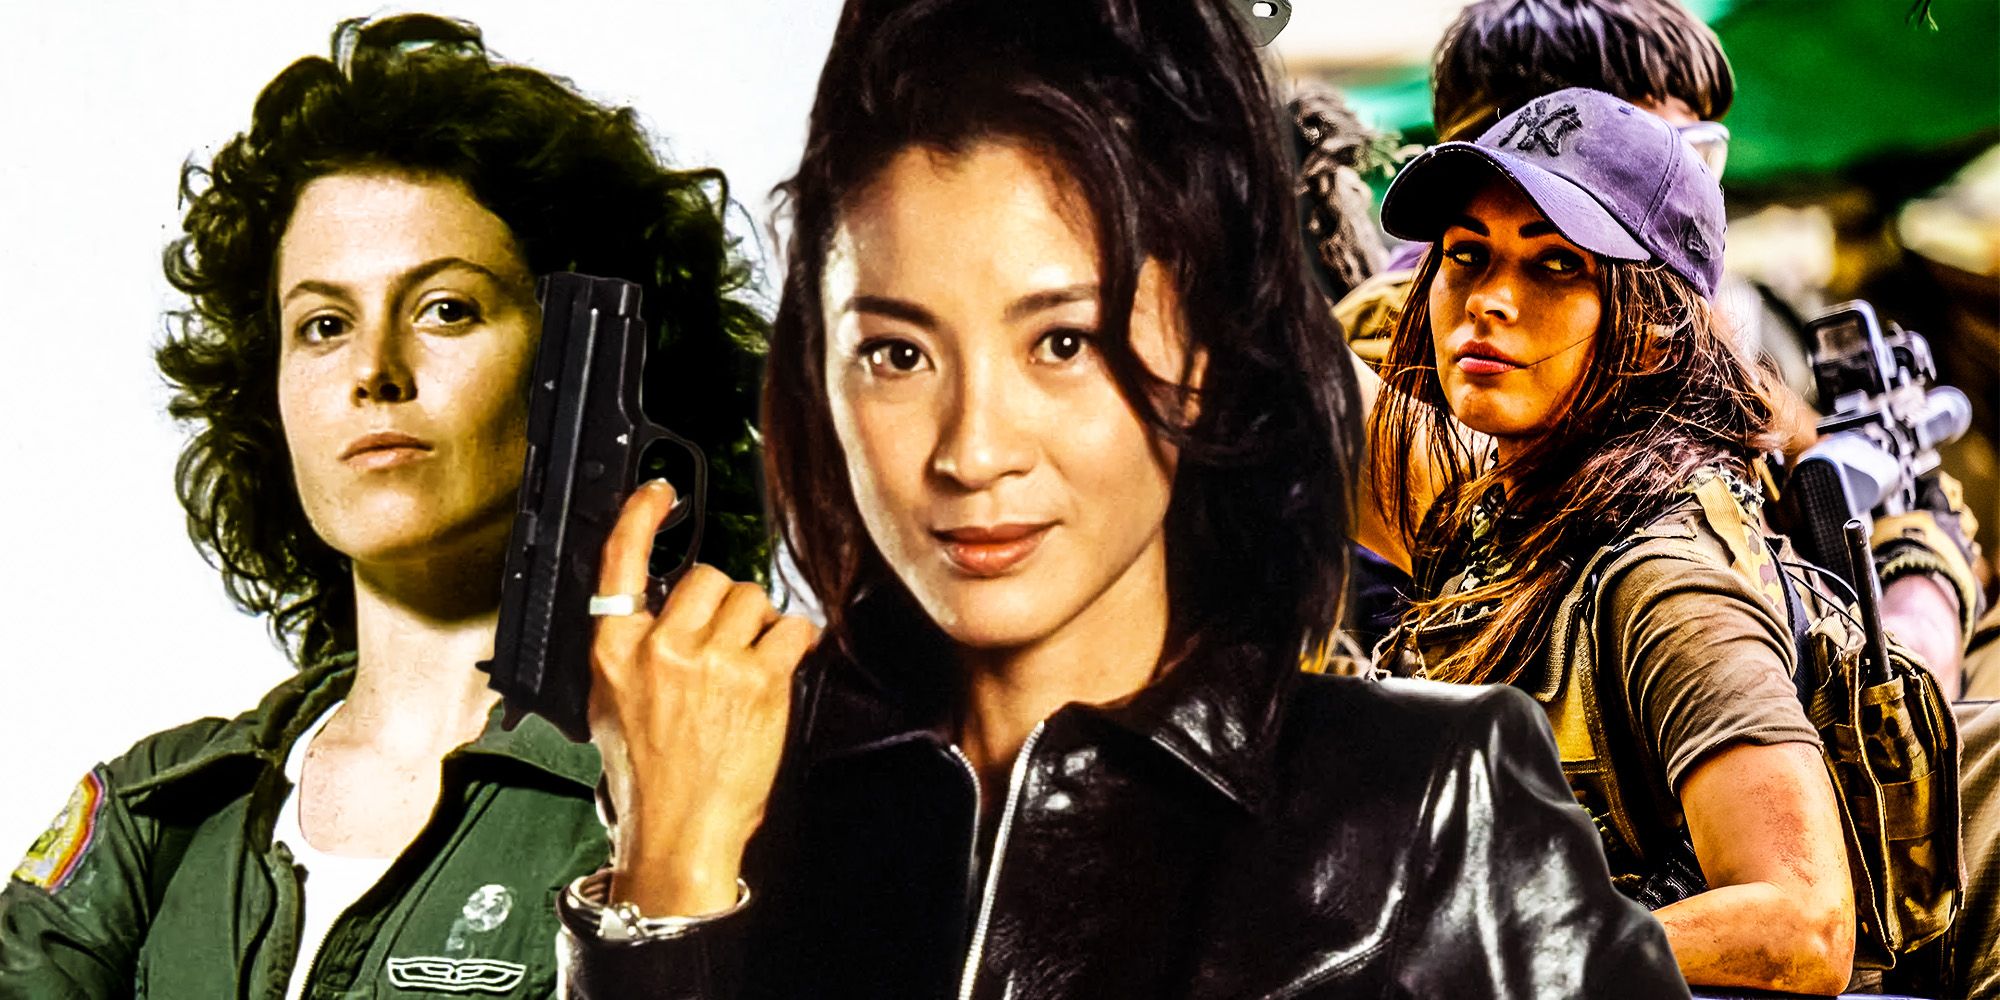 Expendabelles spinoff cancelled megan fox michelle yeoh sigourney weaver